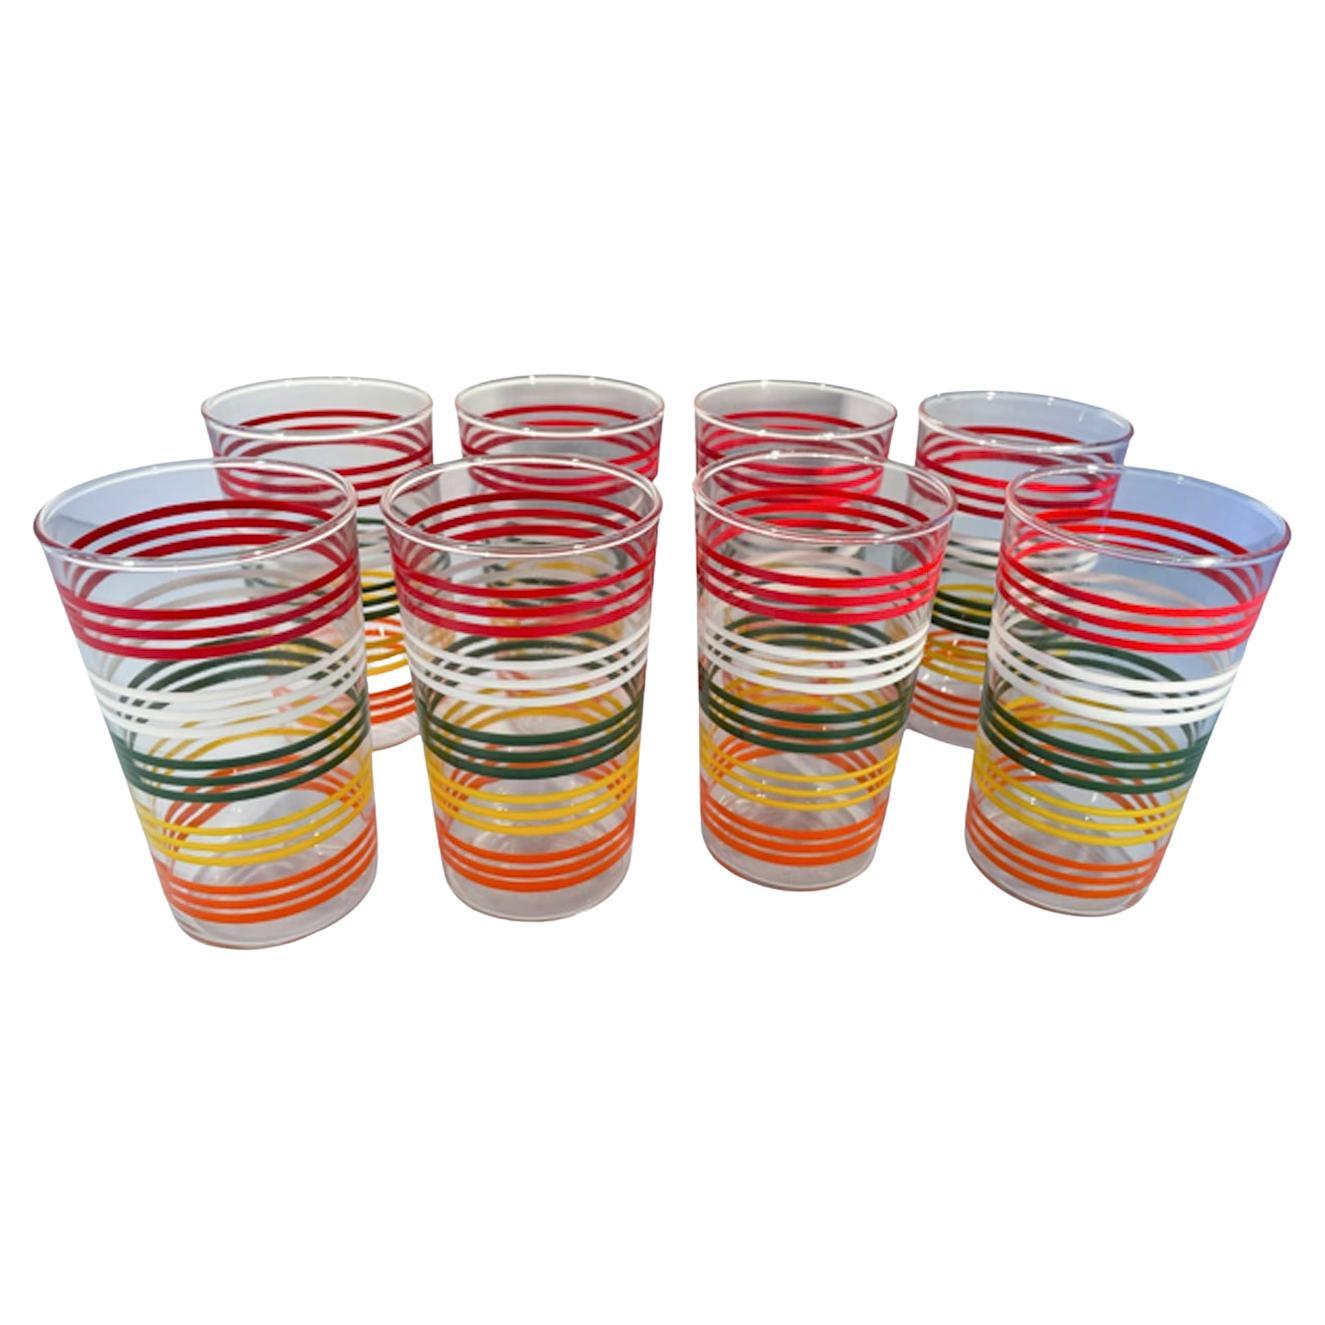 Eight Midcentury Highball Glasses W/Bands of Brightly Colored Lines For Sale